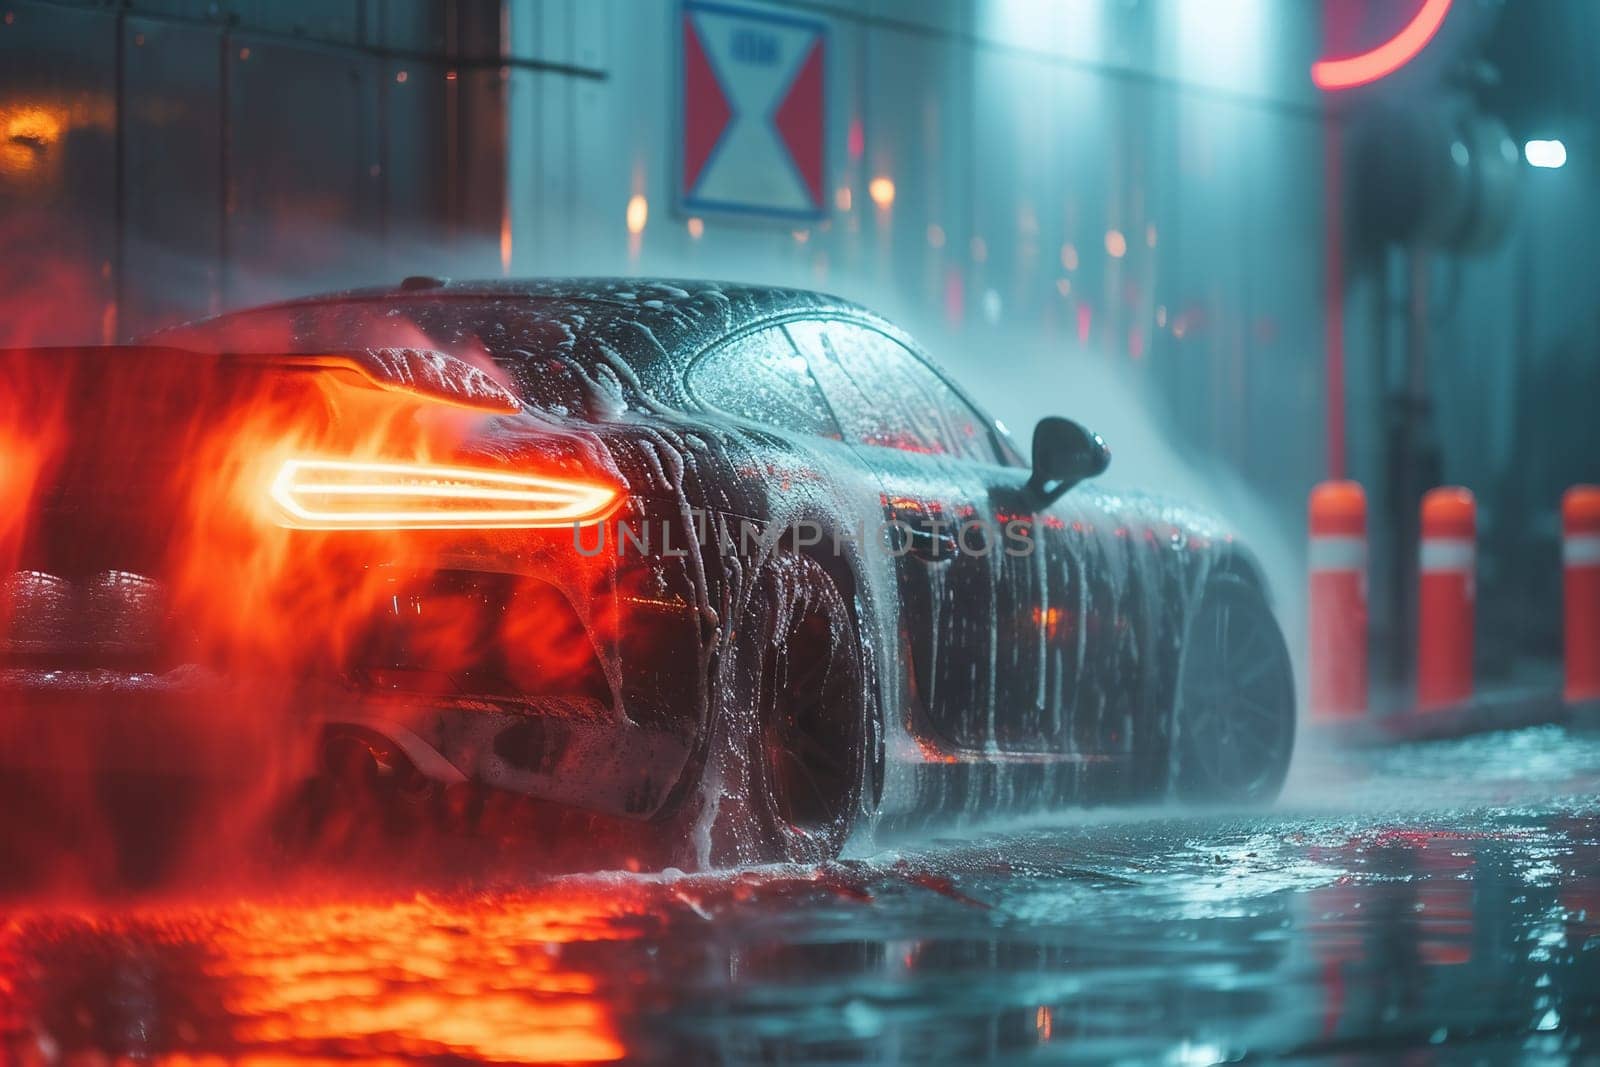 Hard rain fall at night with blurry cars as background. High quality photo